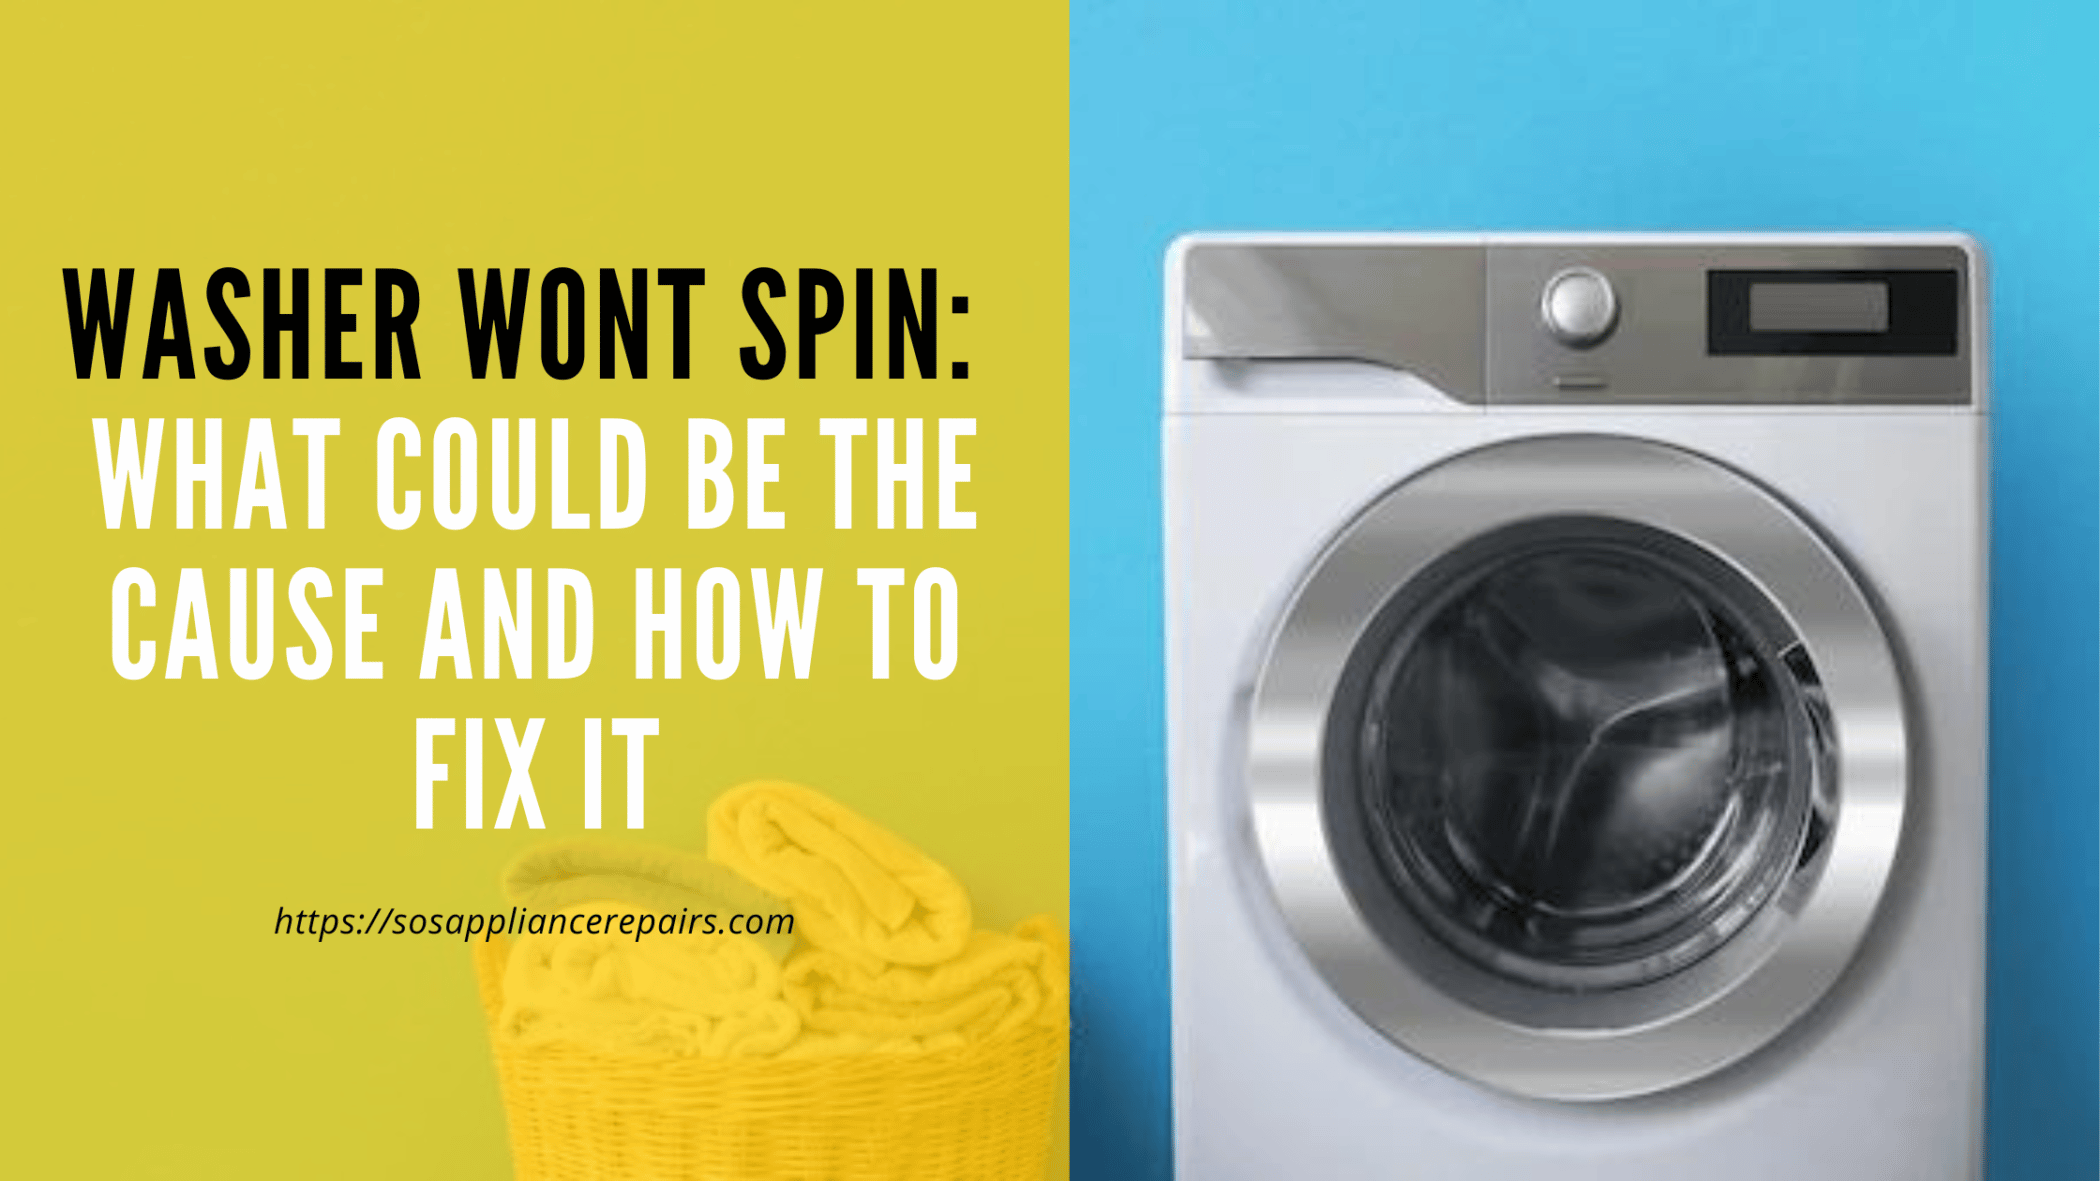 washer won’t spin - sos appliance repairs